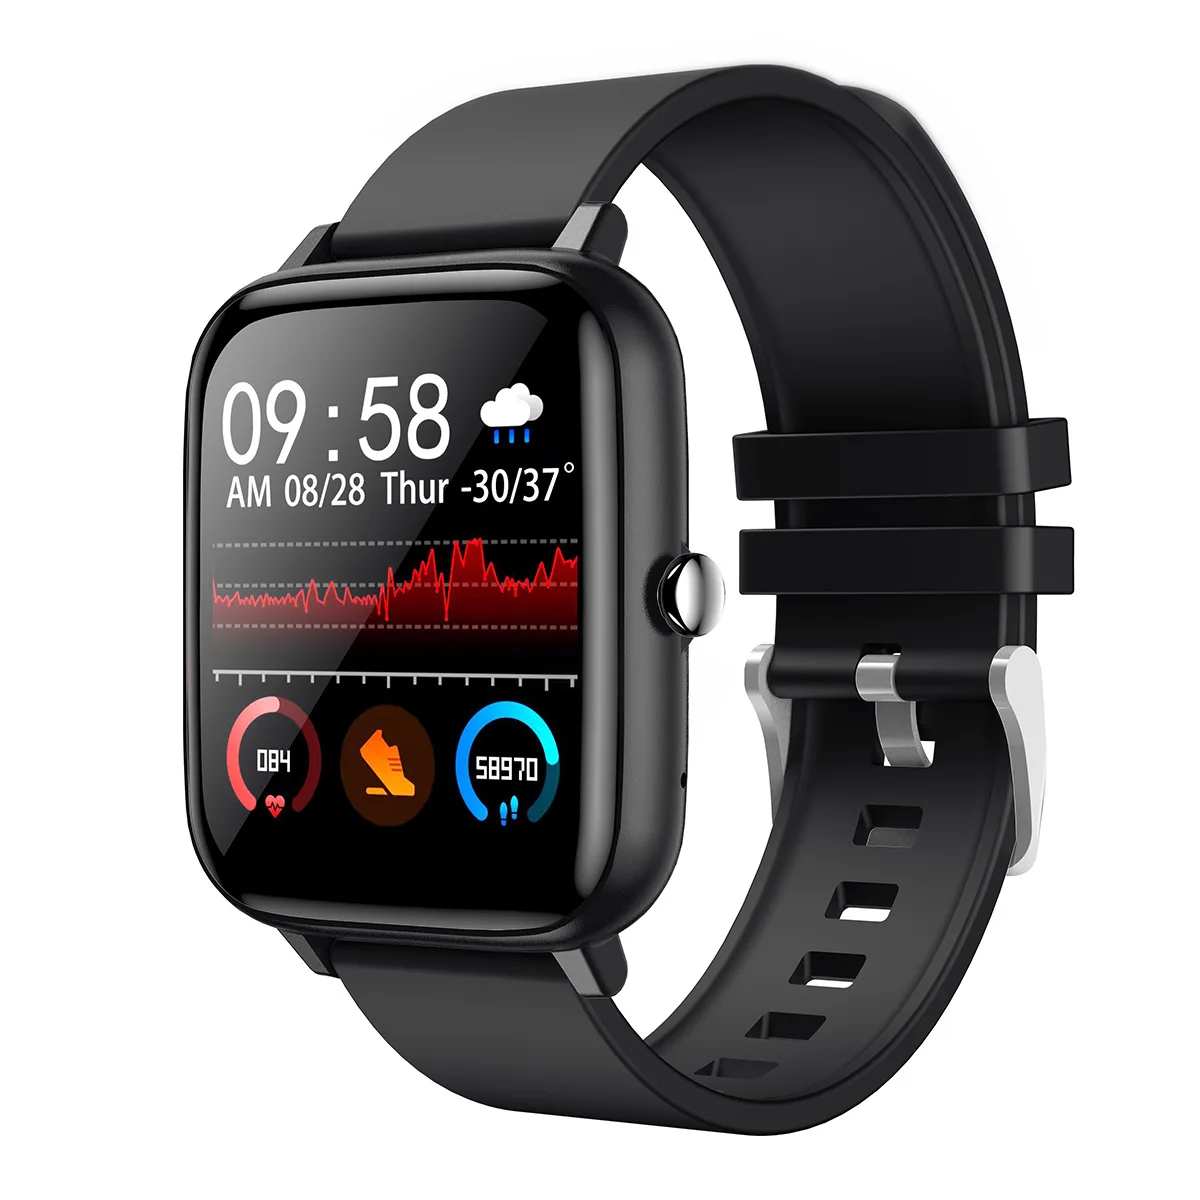 

P6 Smartwatch Bluetooth Talking Voice Heart Rate Blood Pressure Oxygen Monitoring Message Alert Weather Exercise Pedometer